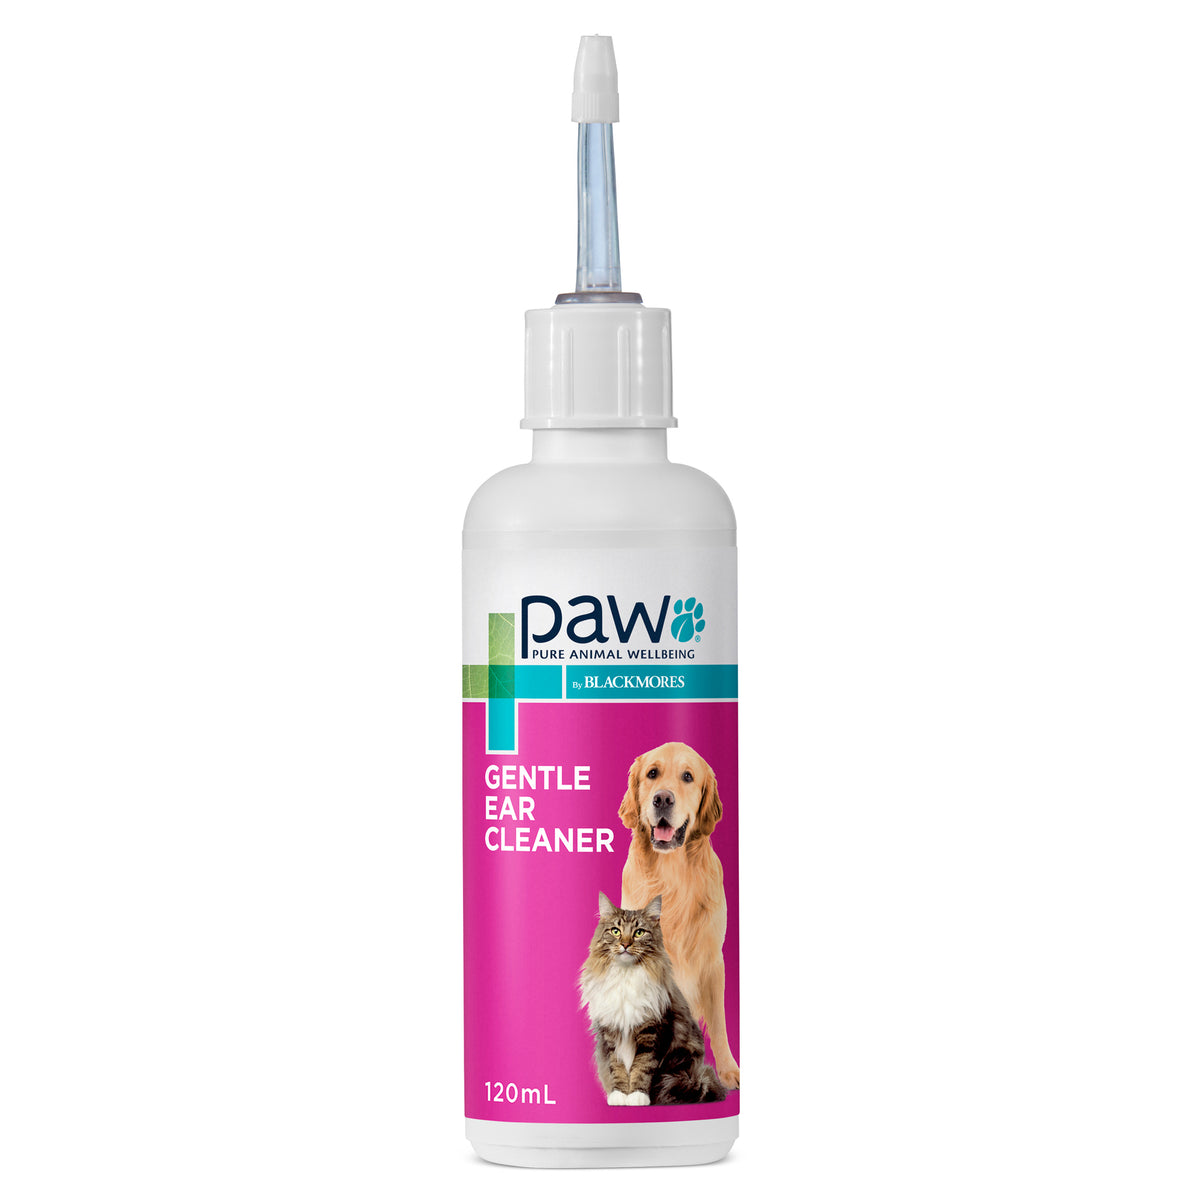 PAW by Blackmores Gentle Dog &amp; Cat Ear Cleaner 120mL